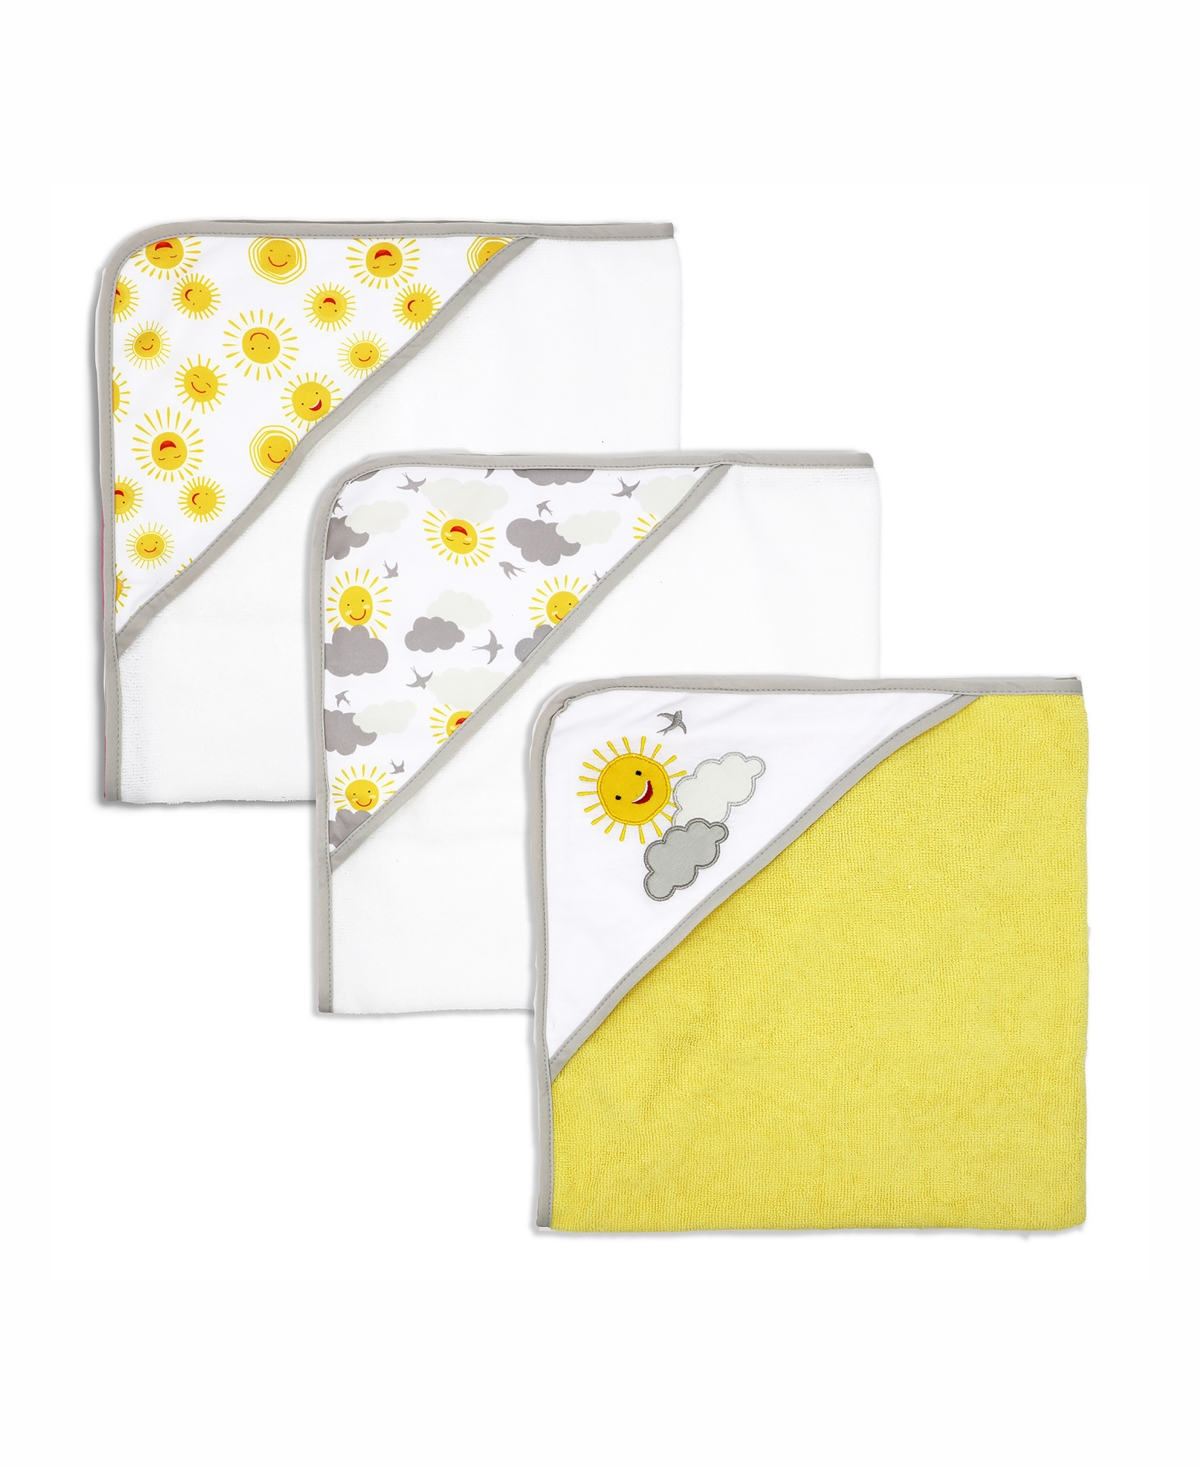 3 Stories Trading Baby Boys And Girls Hooded Towels, Pack Of 3 In Yellow And White